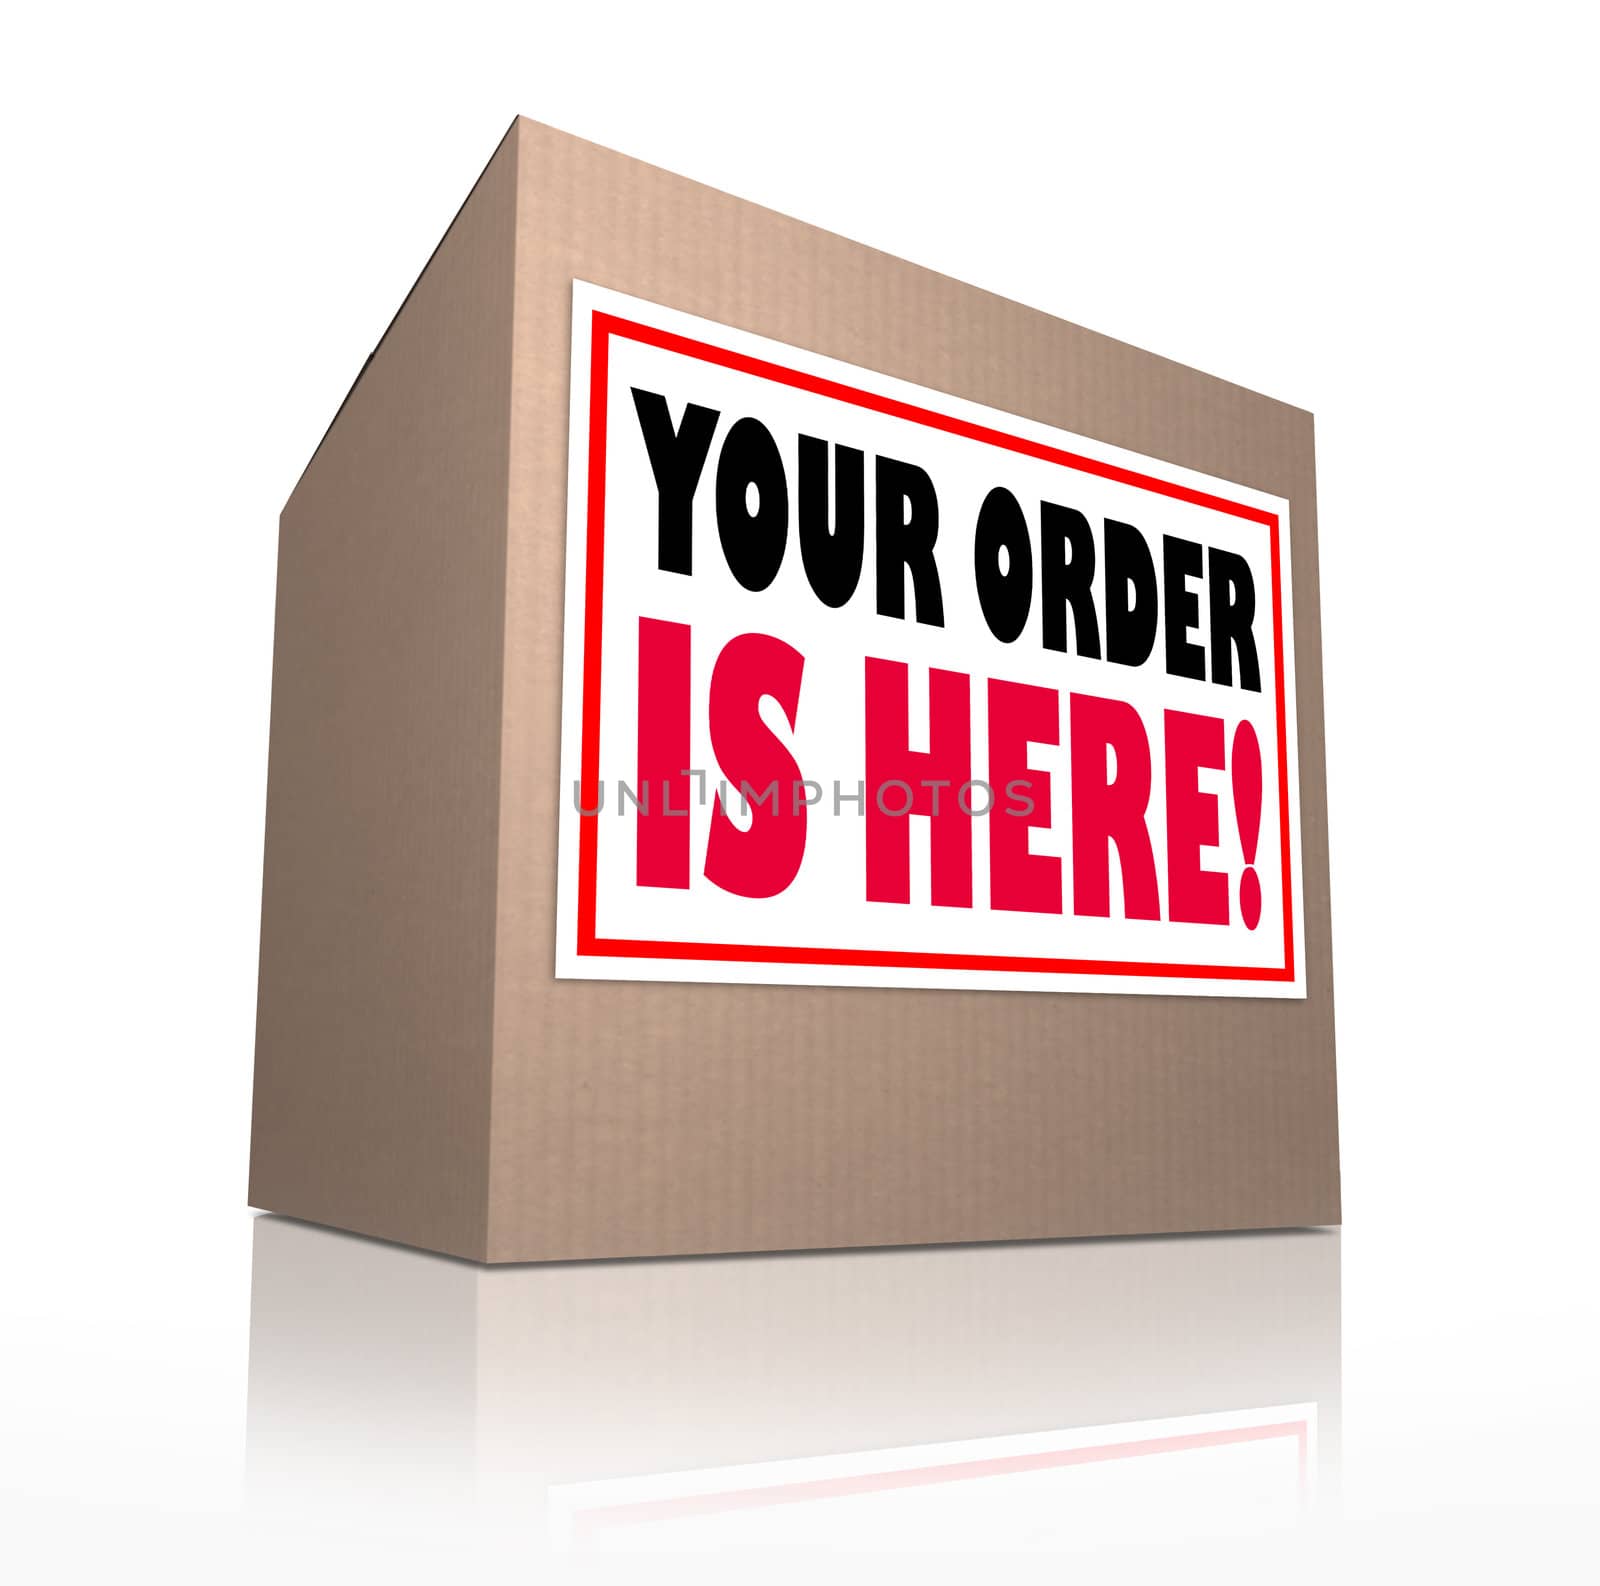 A cardboard box delivered with the words Your Order is Here to tell you that the merchandise you shopped for at a store has been shipped and is waiting for you to open it